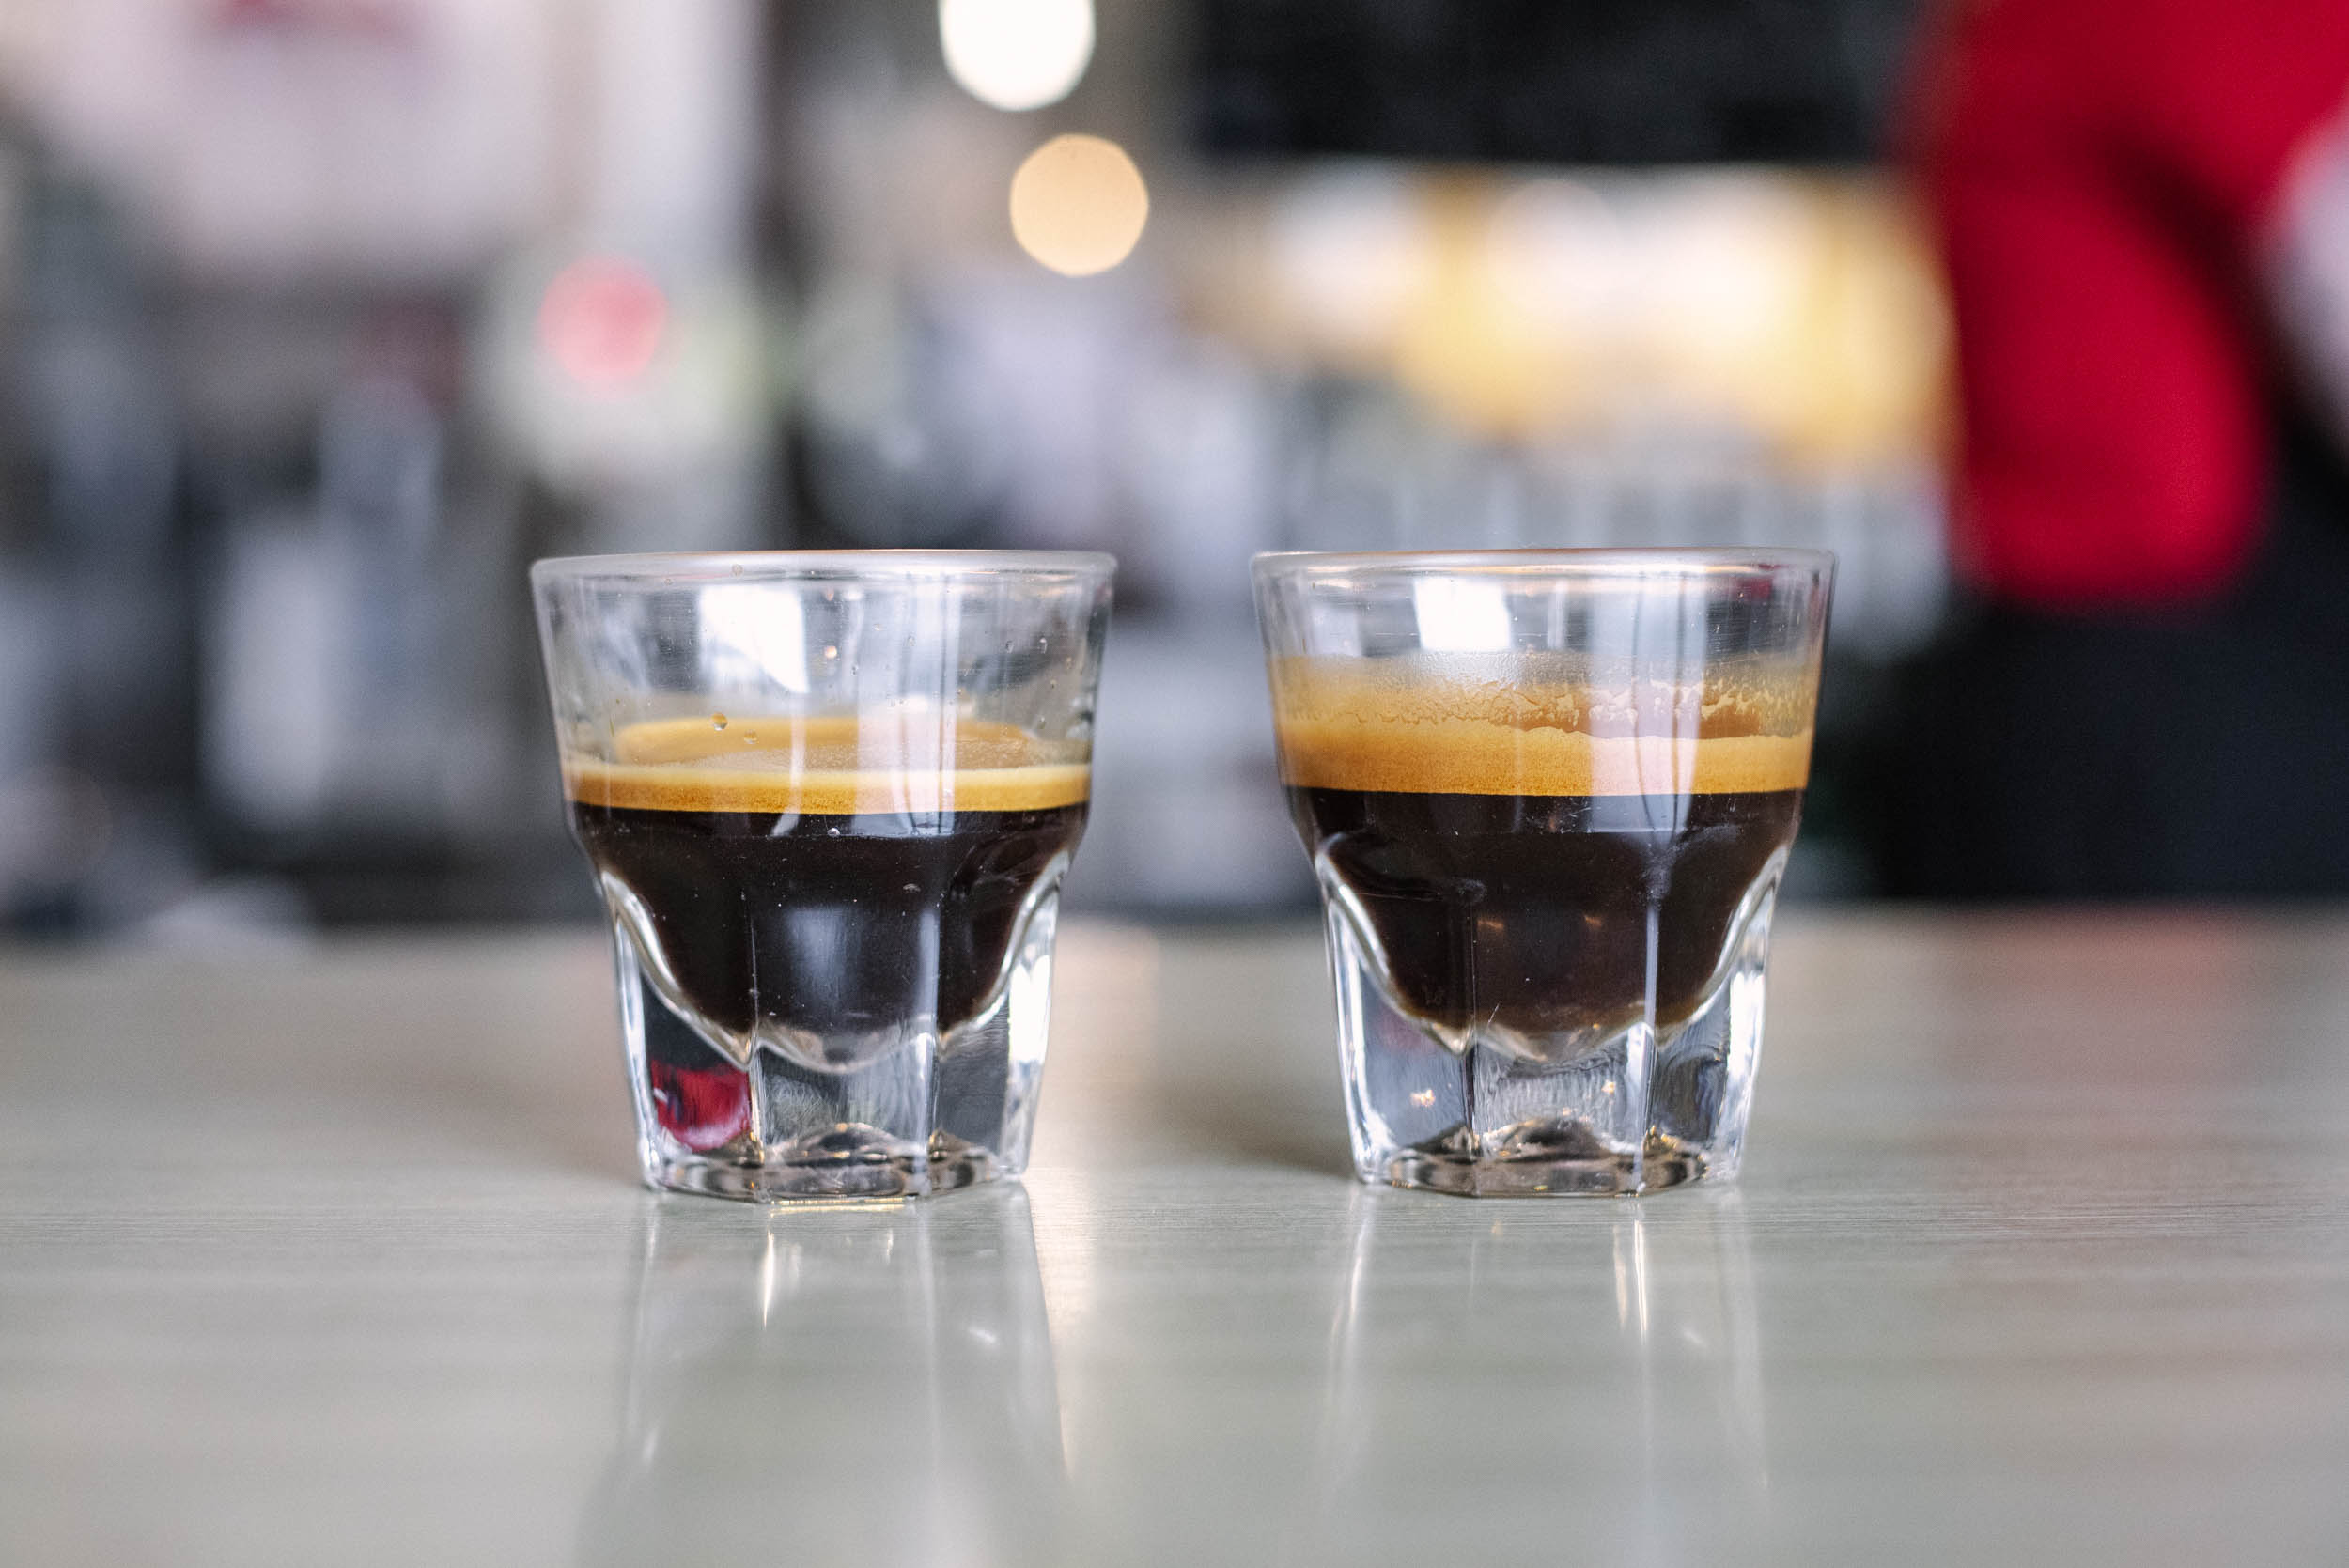 Differences Between Single and Double Espresso Shots